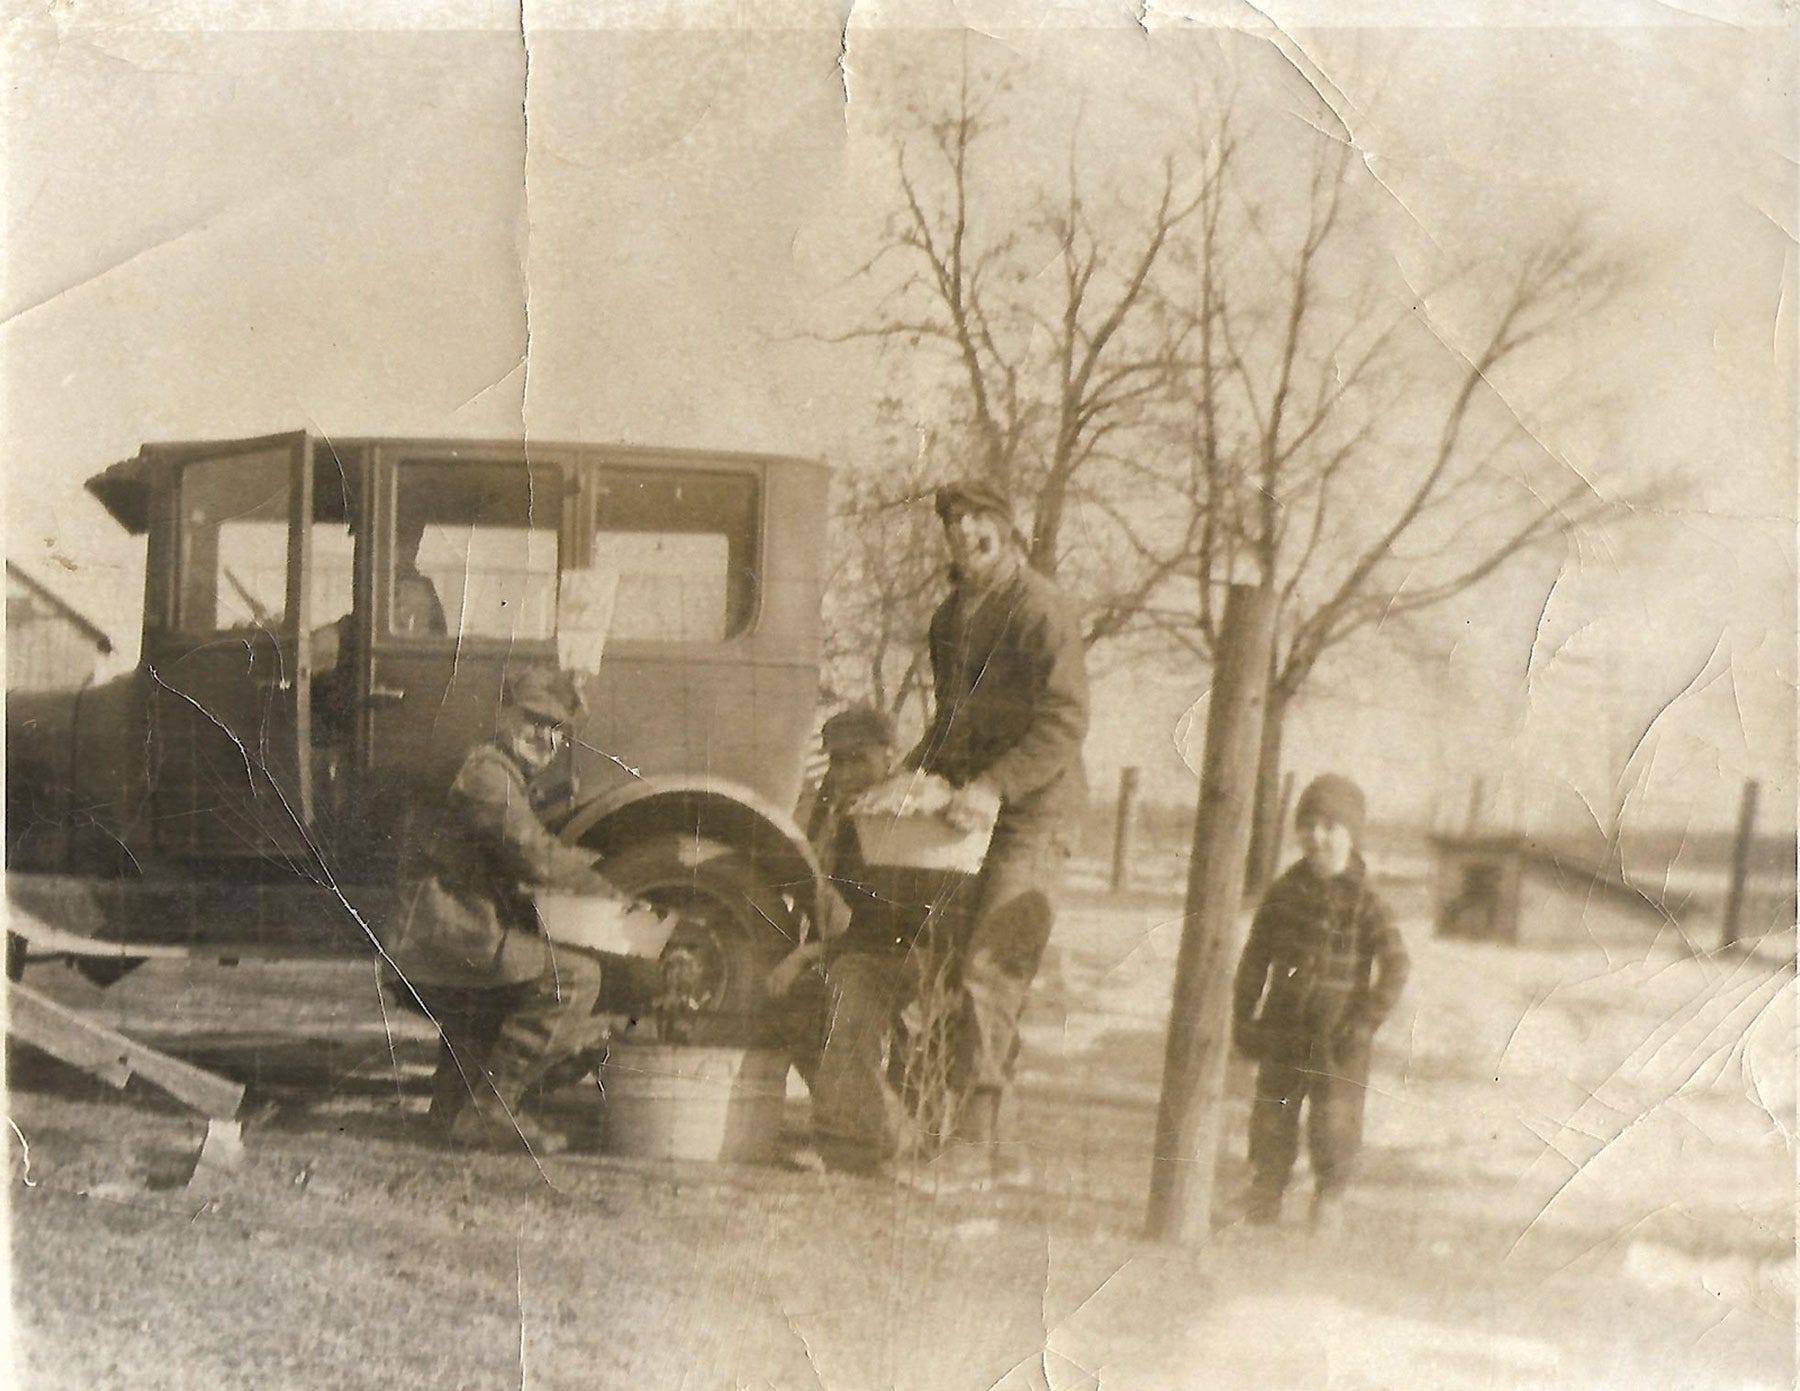 A worn, sepia-toned photograph of three men and a boy working with a meat grinder attached to a Model T Ford